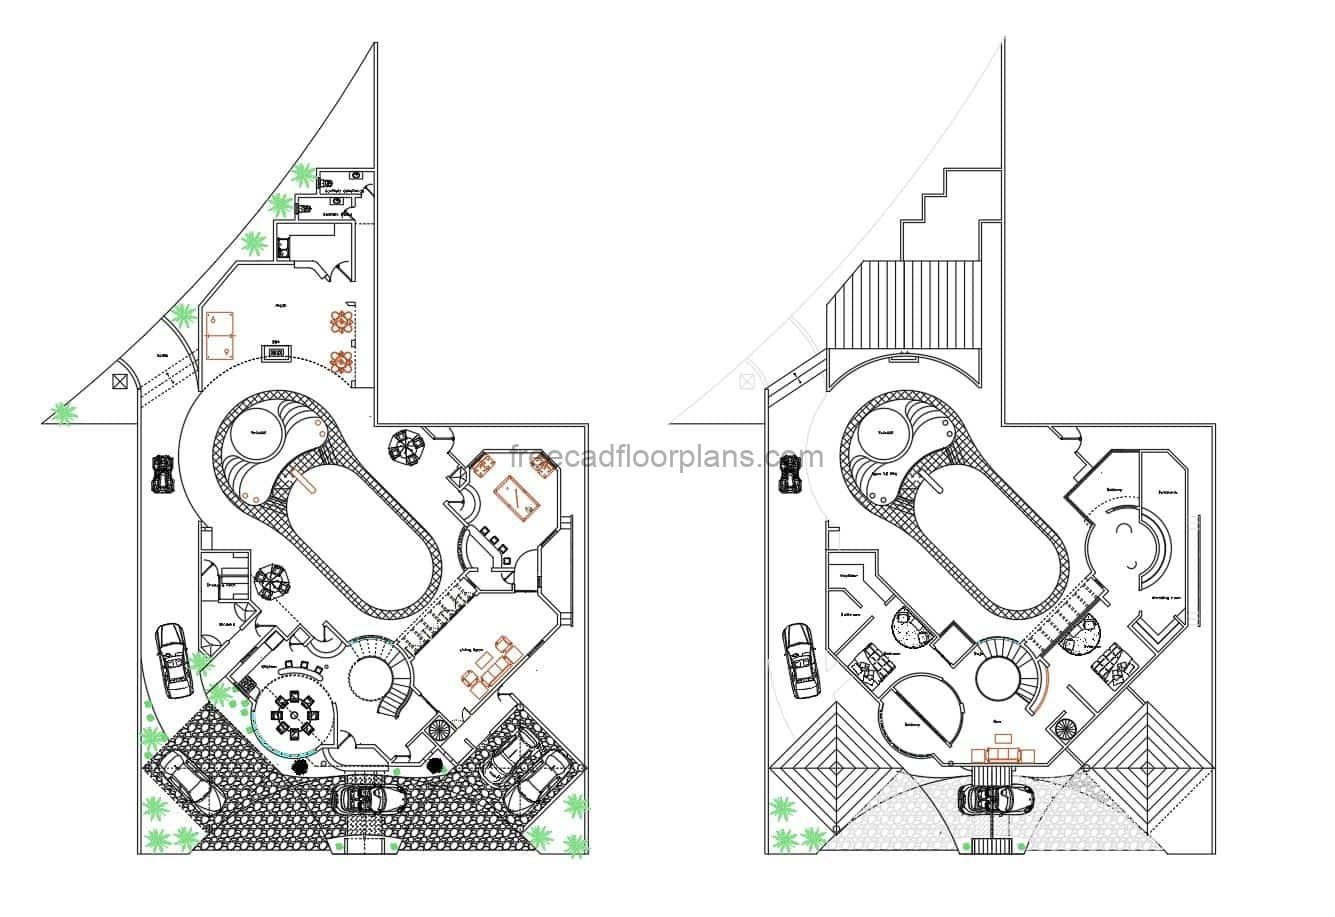 Two level villa plans with two large bedrooms and large patio area with pool, jacuzzi, playground and recreation areas. Circular staircase in the center and social area on the first level with living rooms, kitchen and dining room. Plans for free download in AutoCAD dwg format.